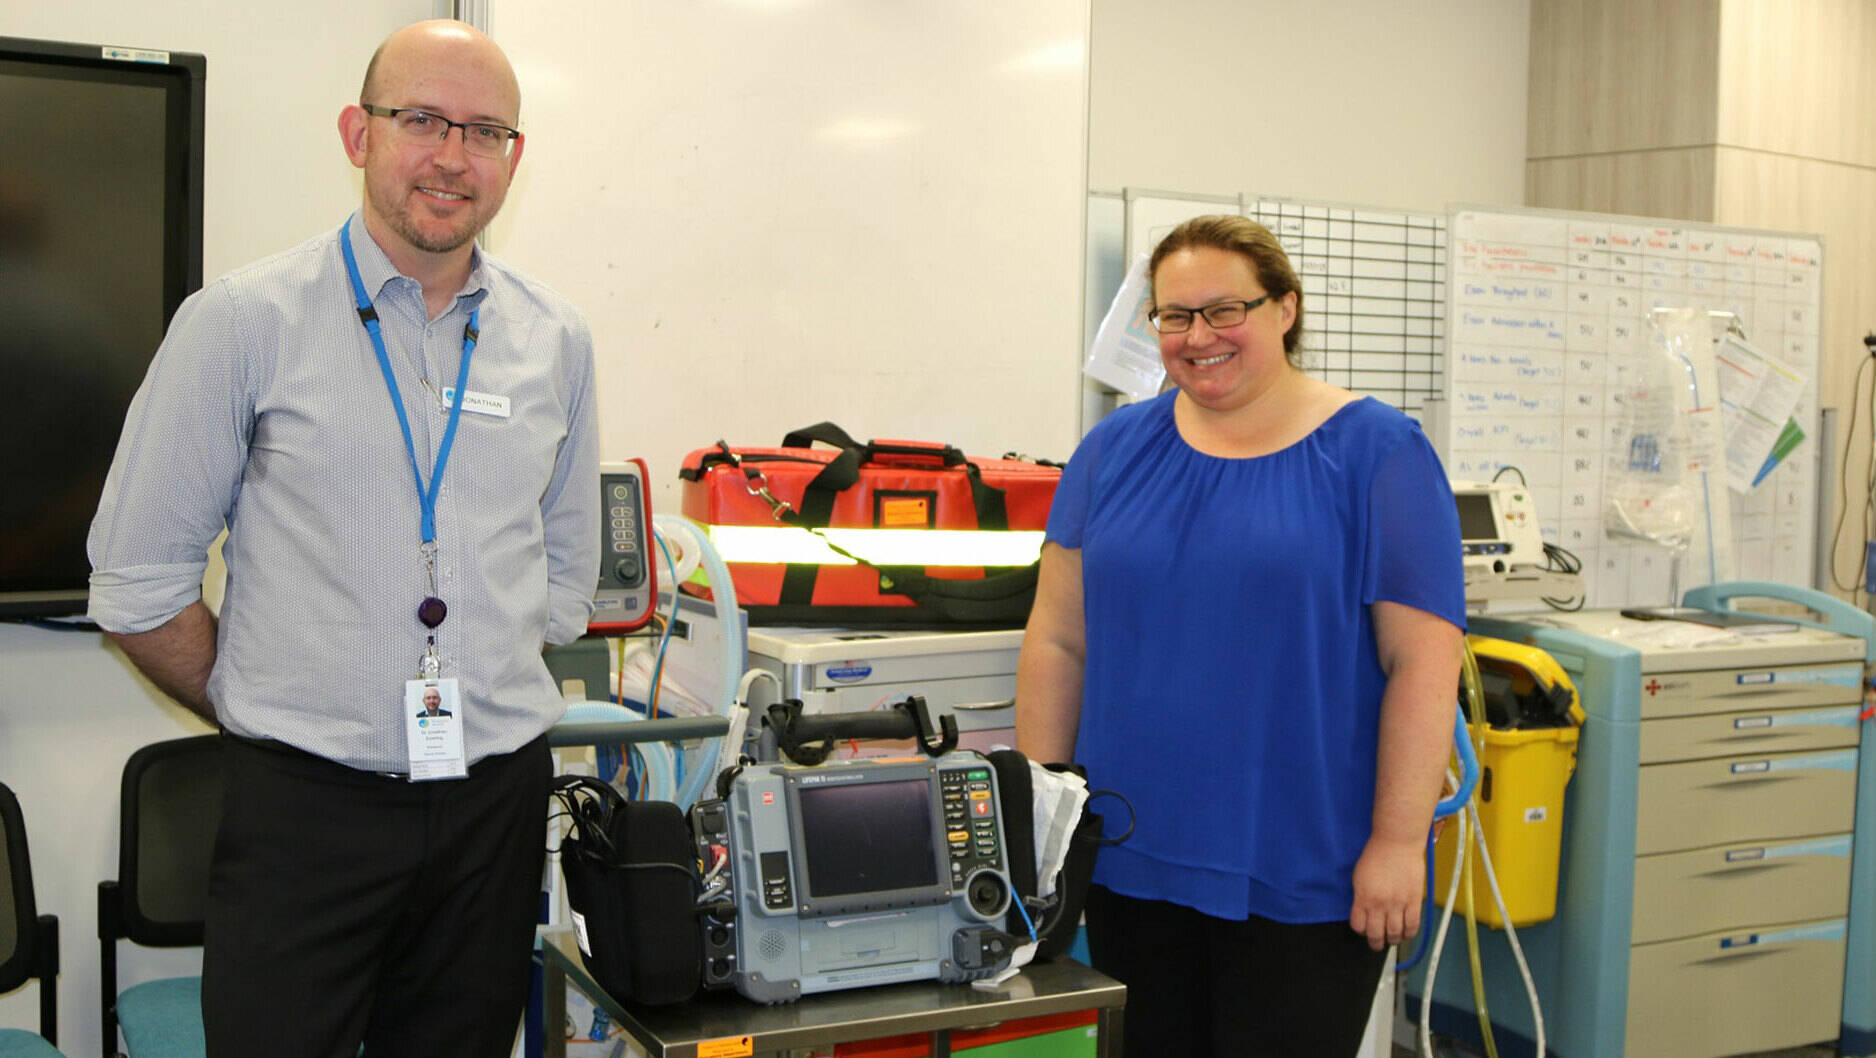 Image Photo — Kim Hahn, Long Island Point Plant Manager and Dr Jonathan Dowling, Frankston Hospital’s Emergency Department Deputy Director, with the defibrillator funded by ExxonMobil.